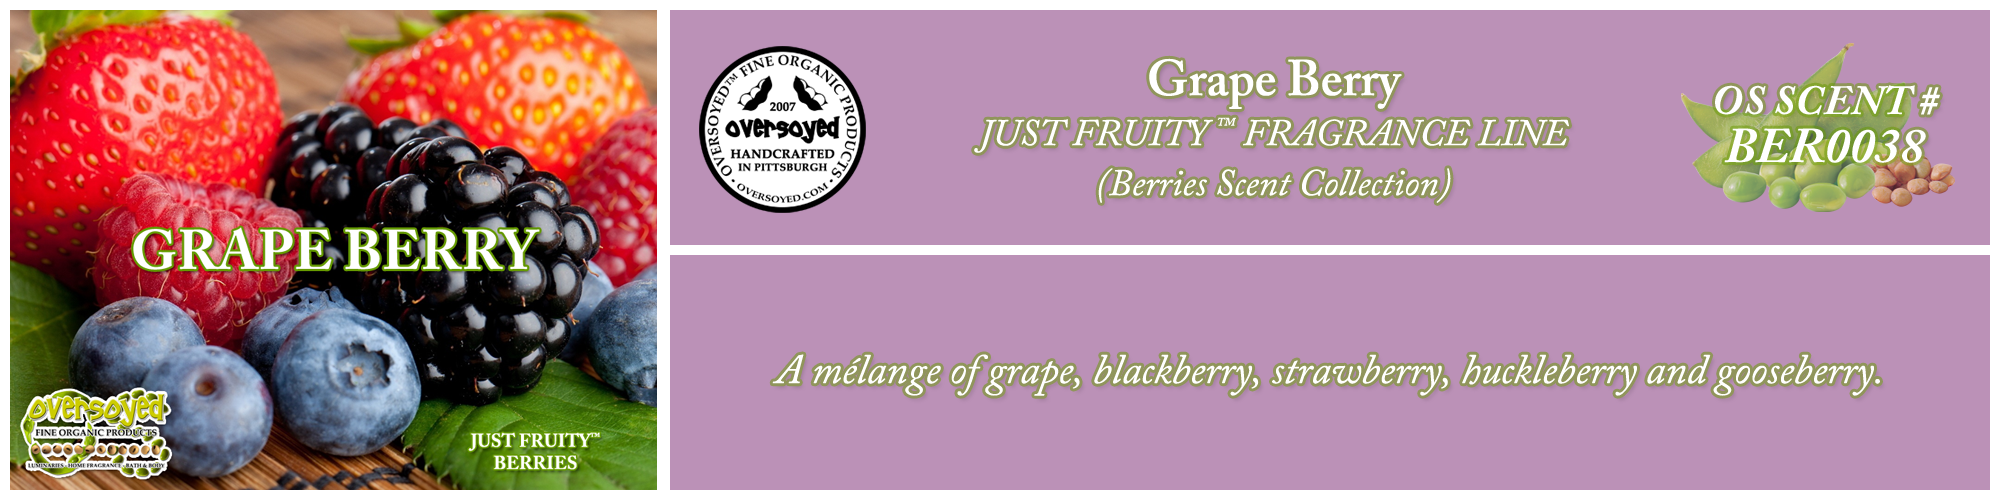 Grape Berry Handcrafted Products Collection